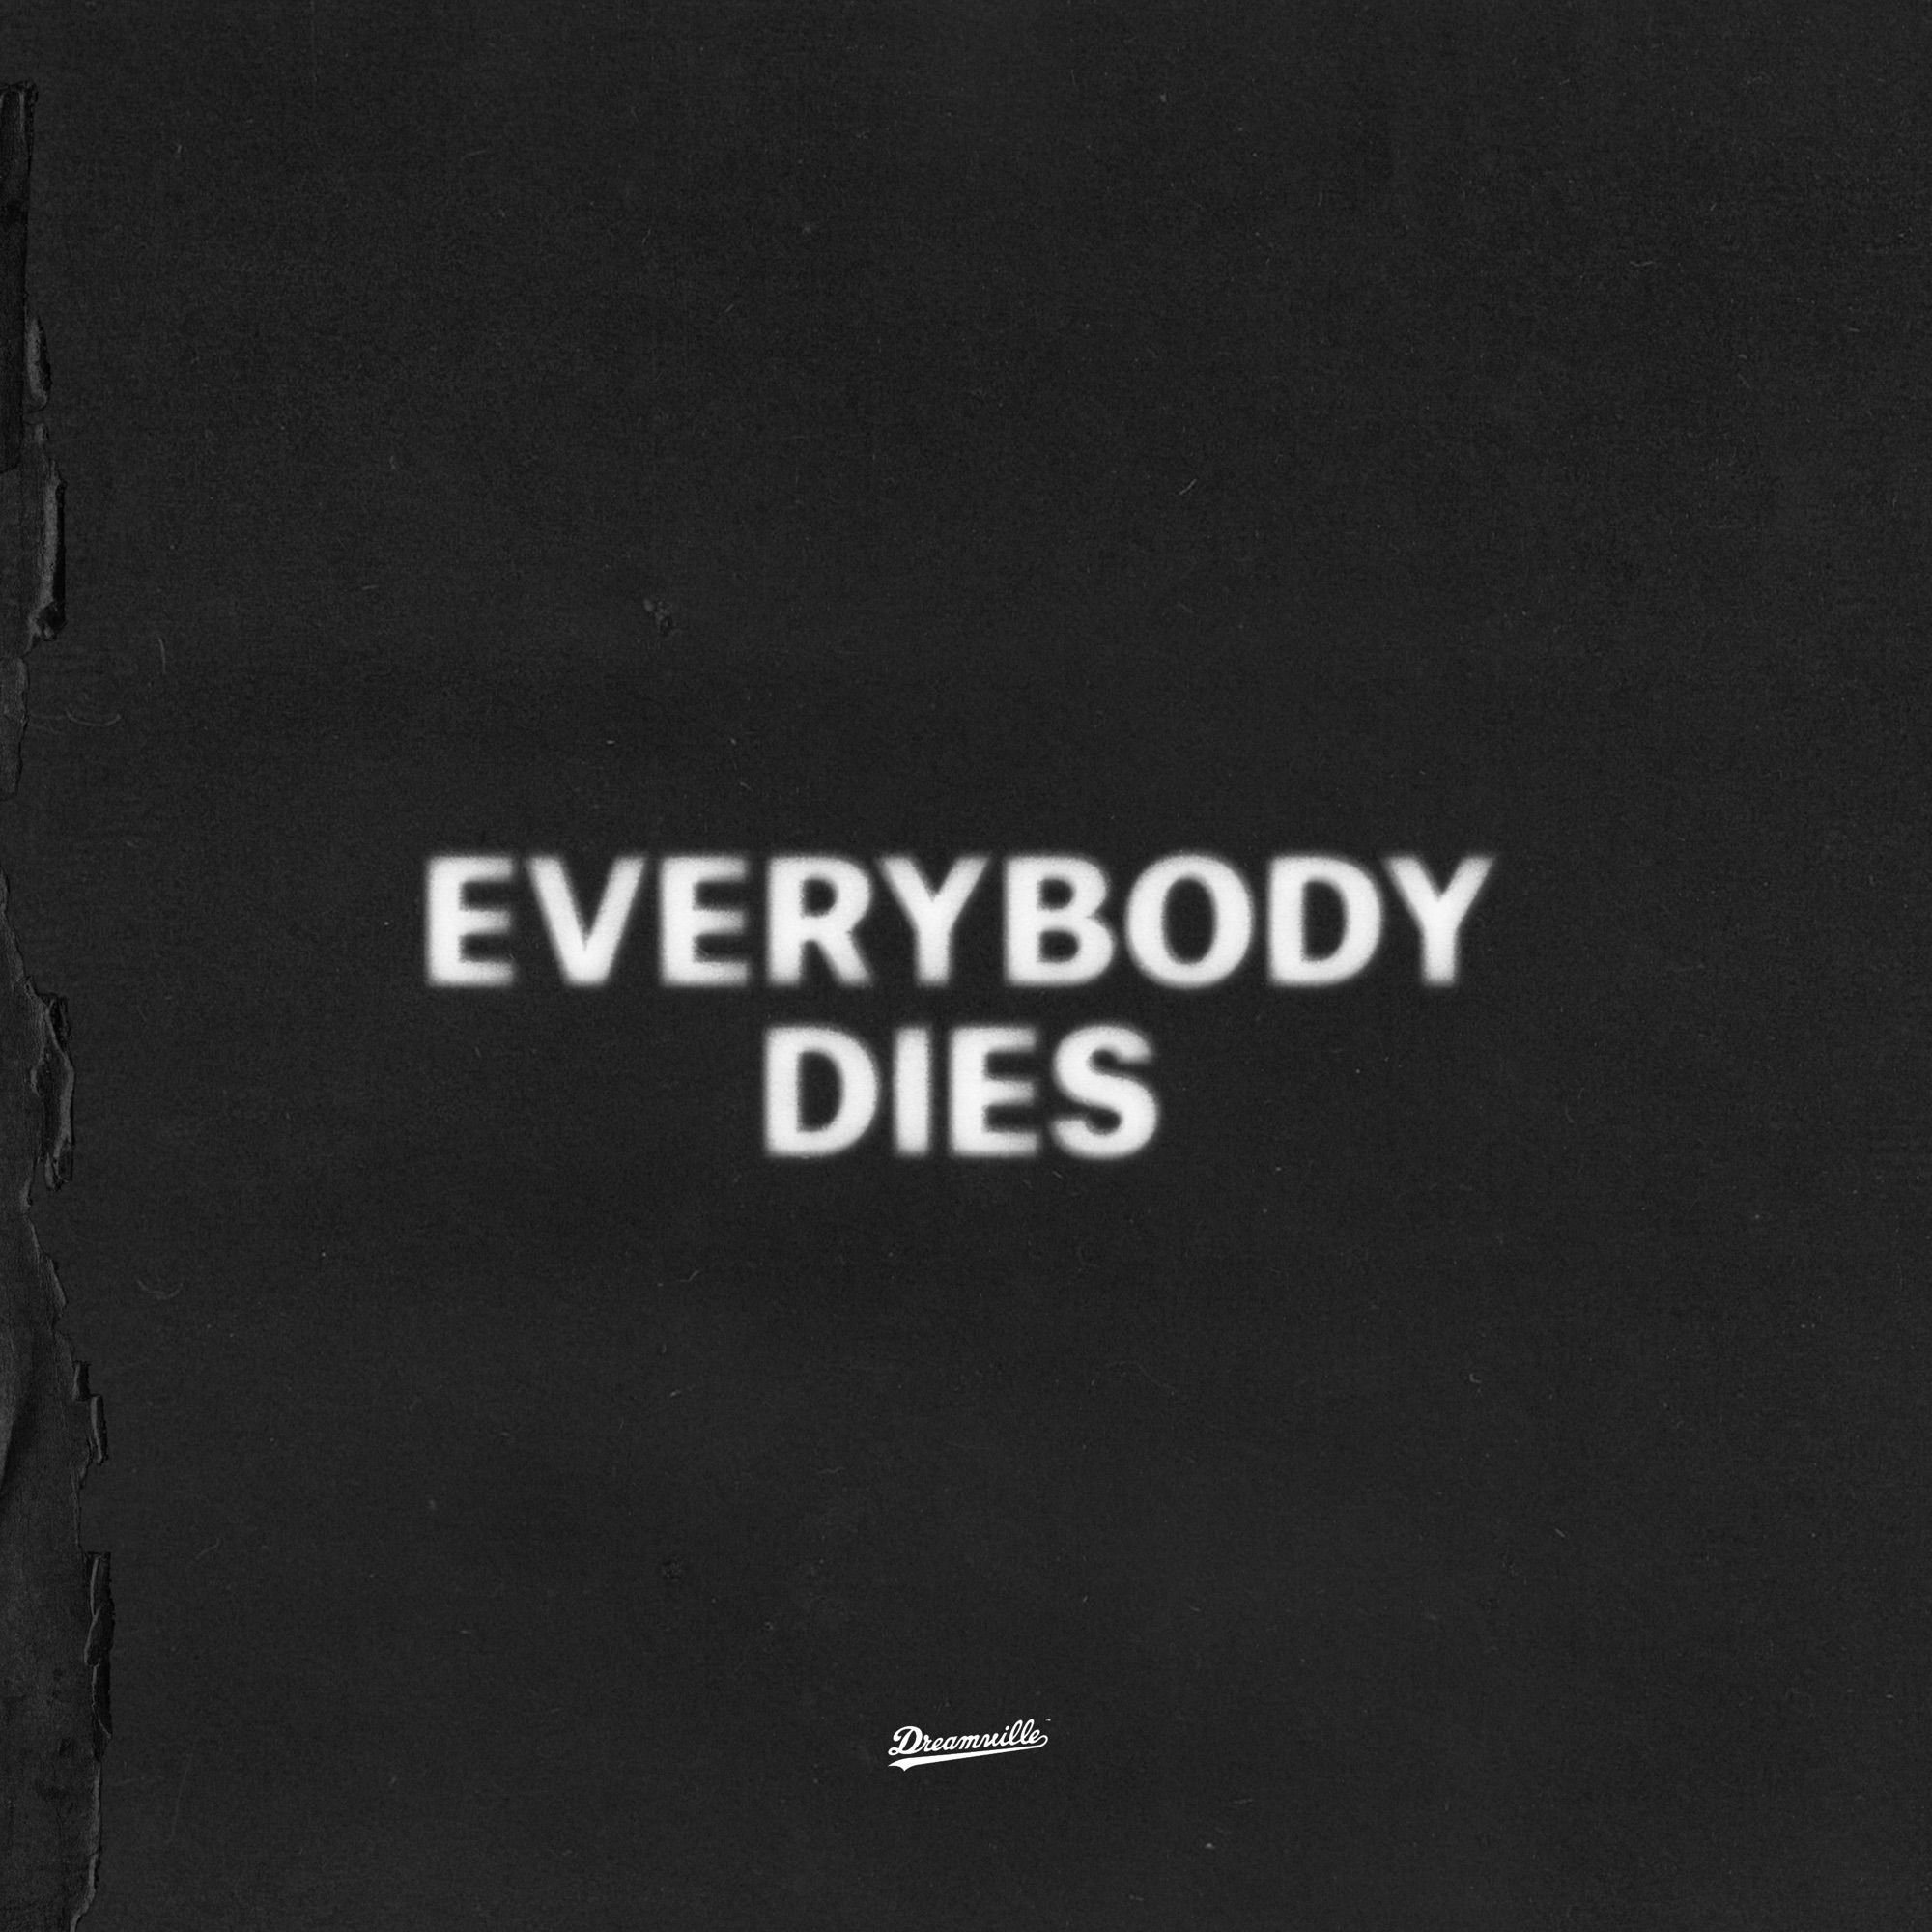 Art for everybody dies by J. Cole